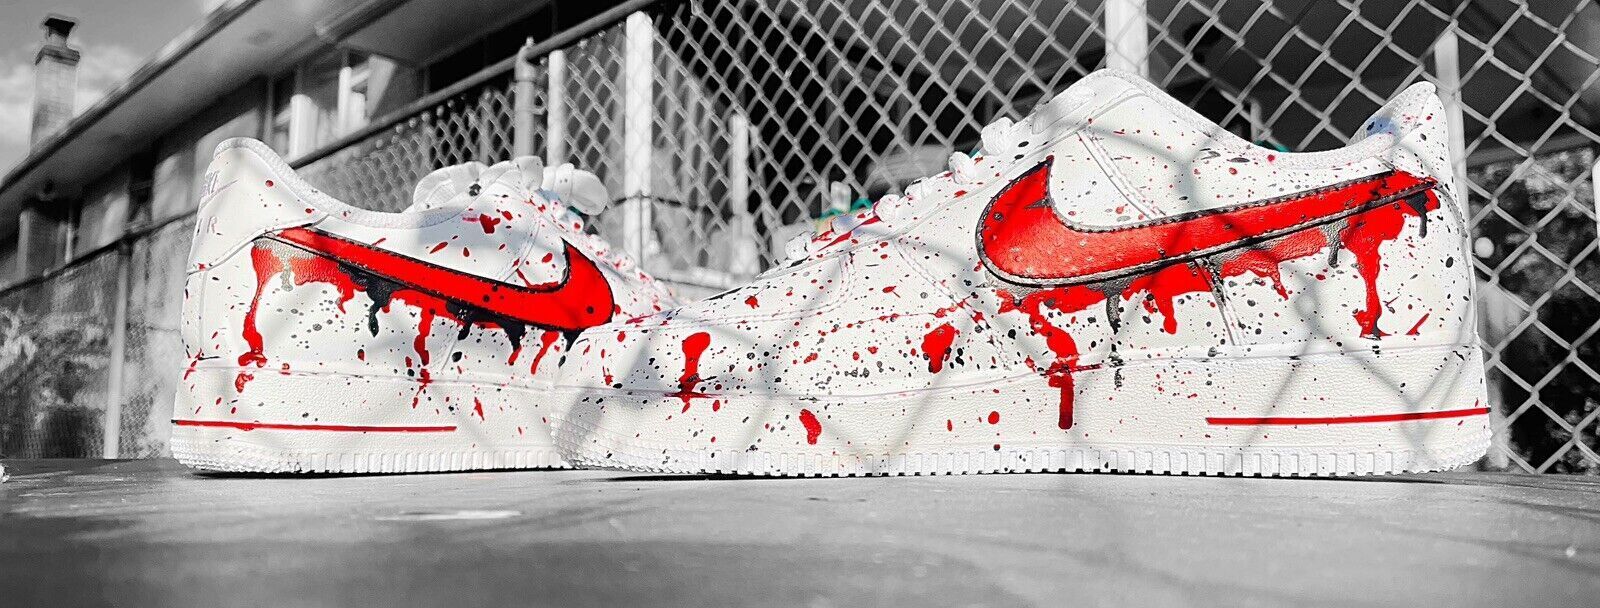 Air Force 1 Custom Shoes Drip Swoosh Hand Painted AF1 Sneakers 